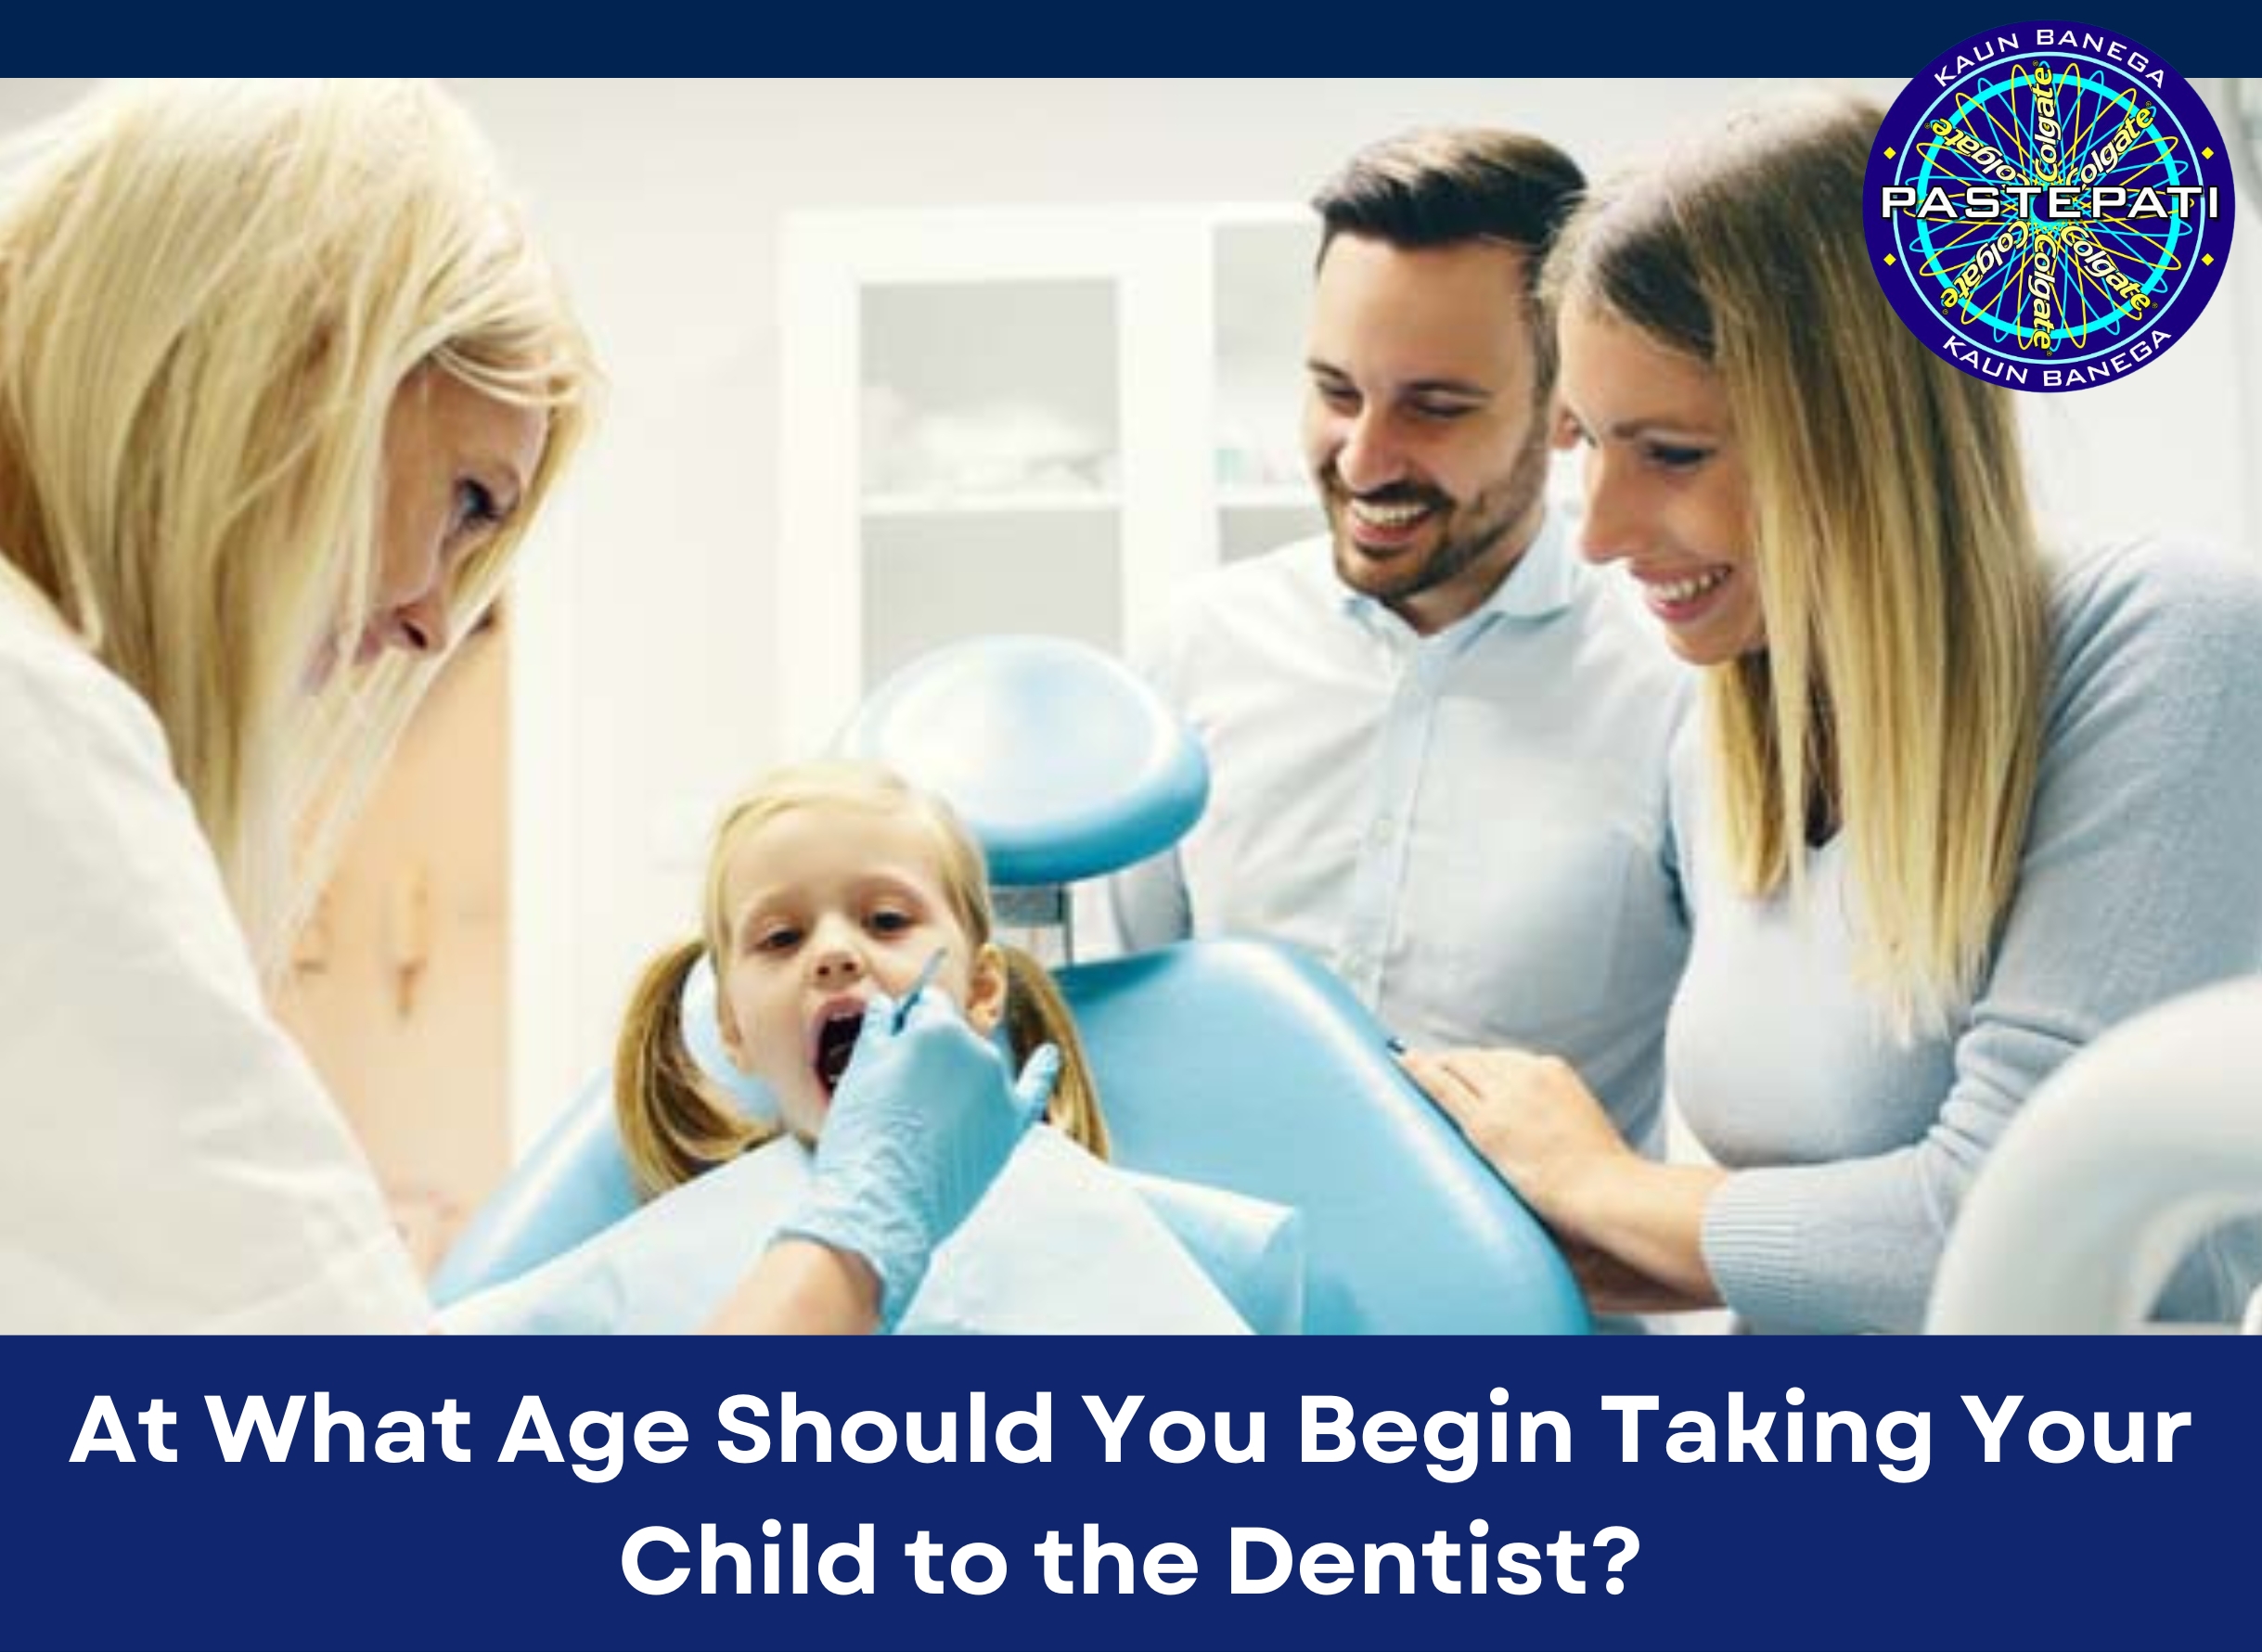 At What Age Should You Begin Taking Your Child to the Dentist?